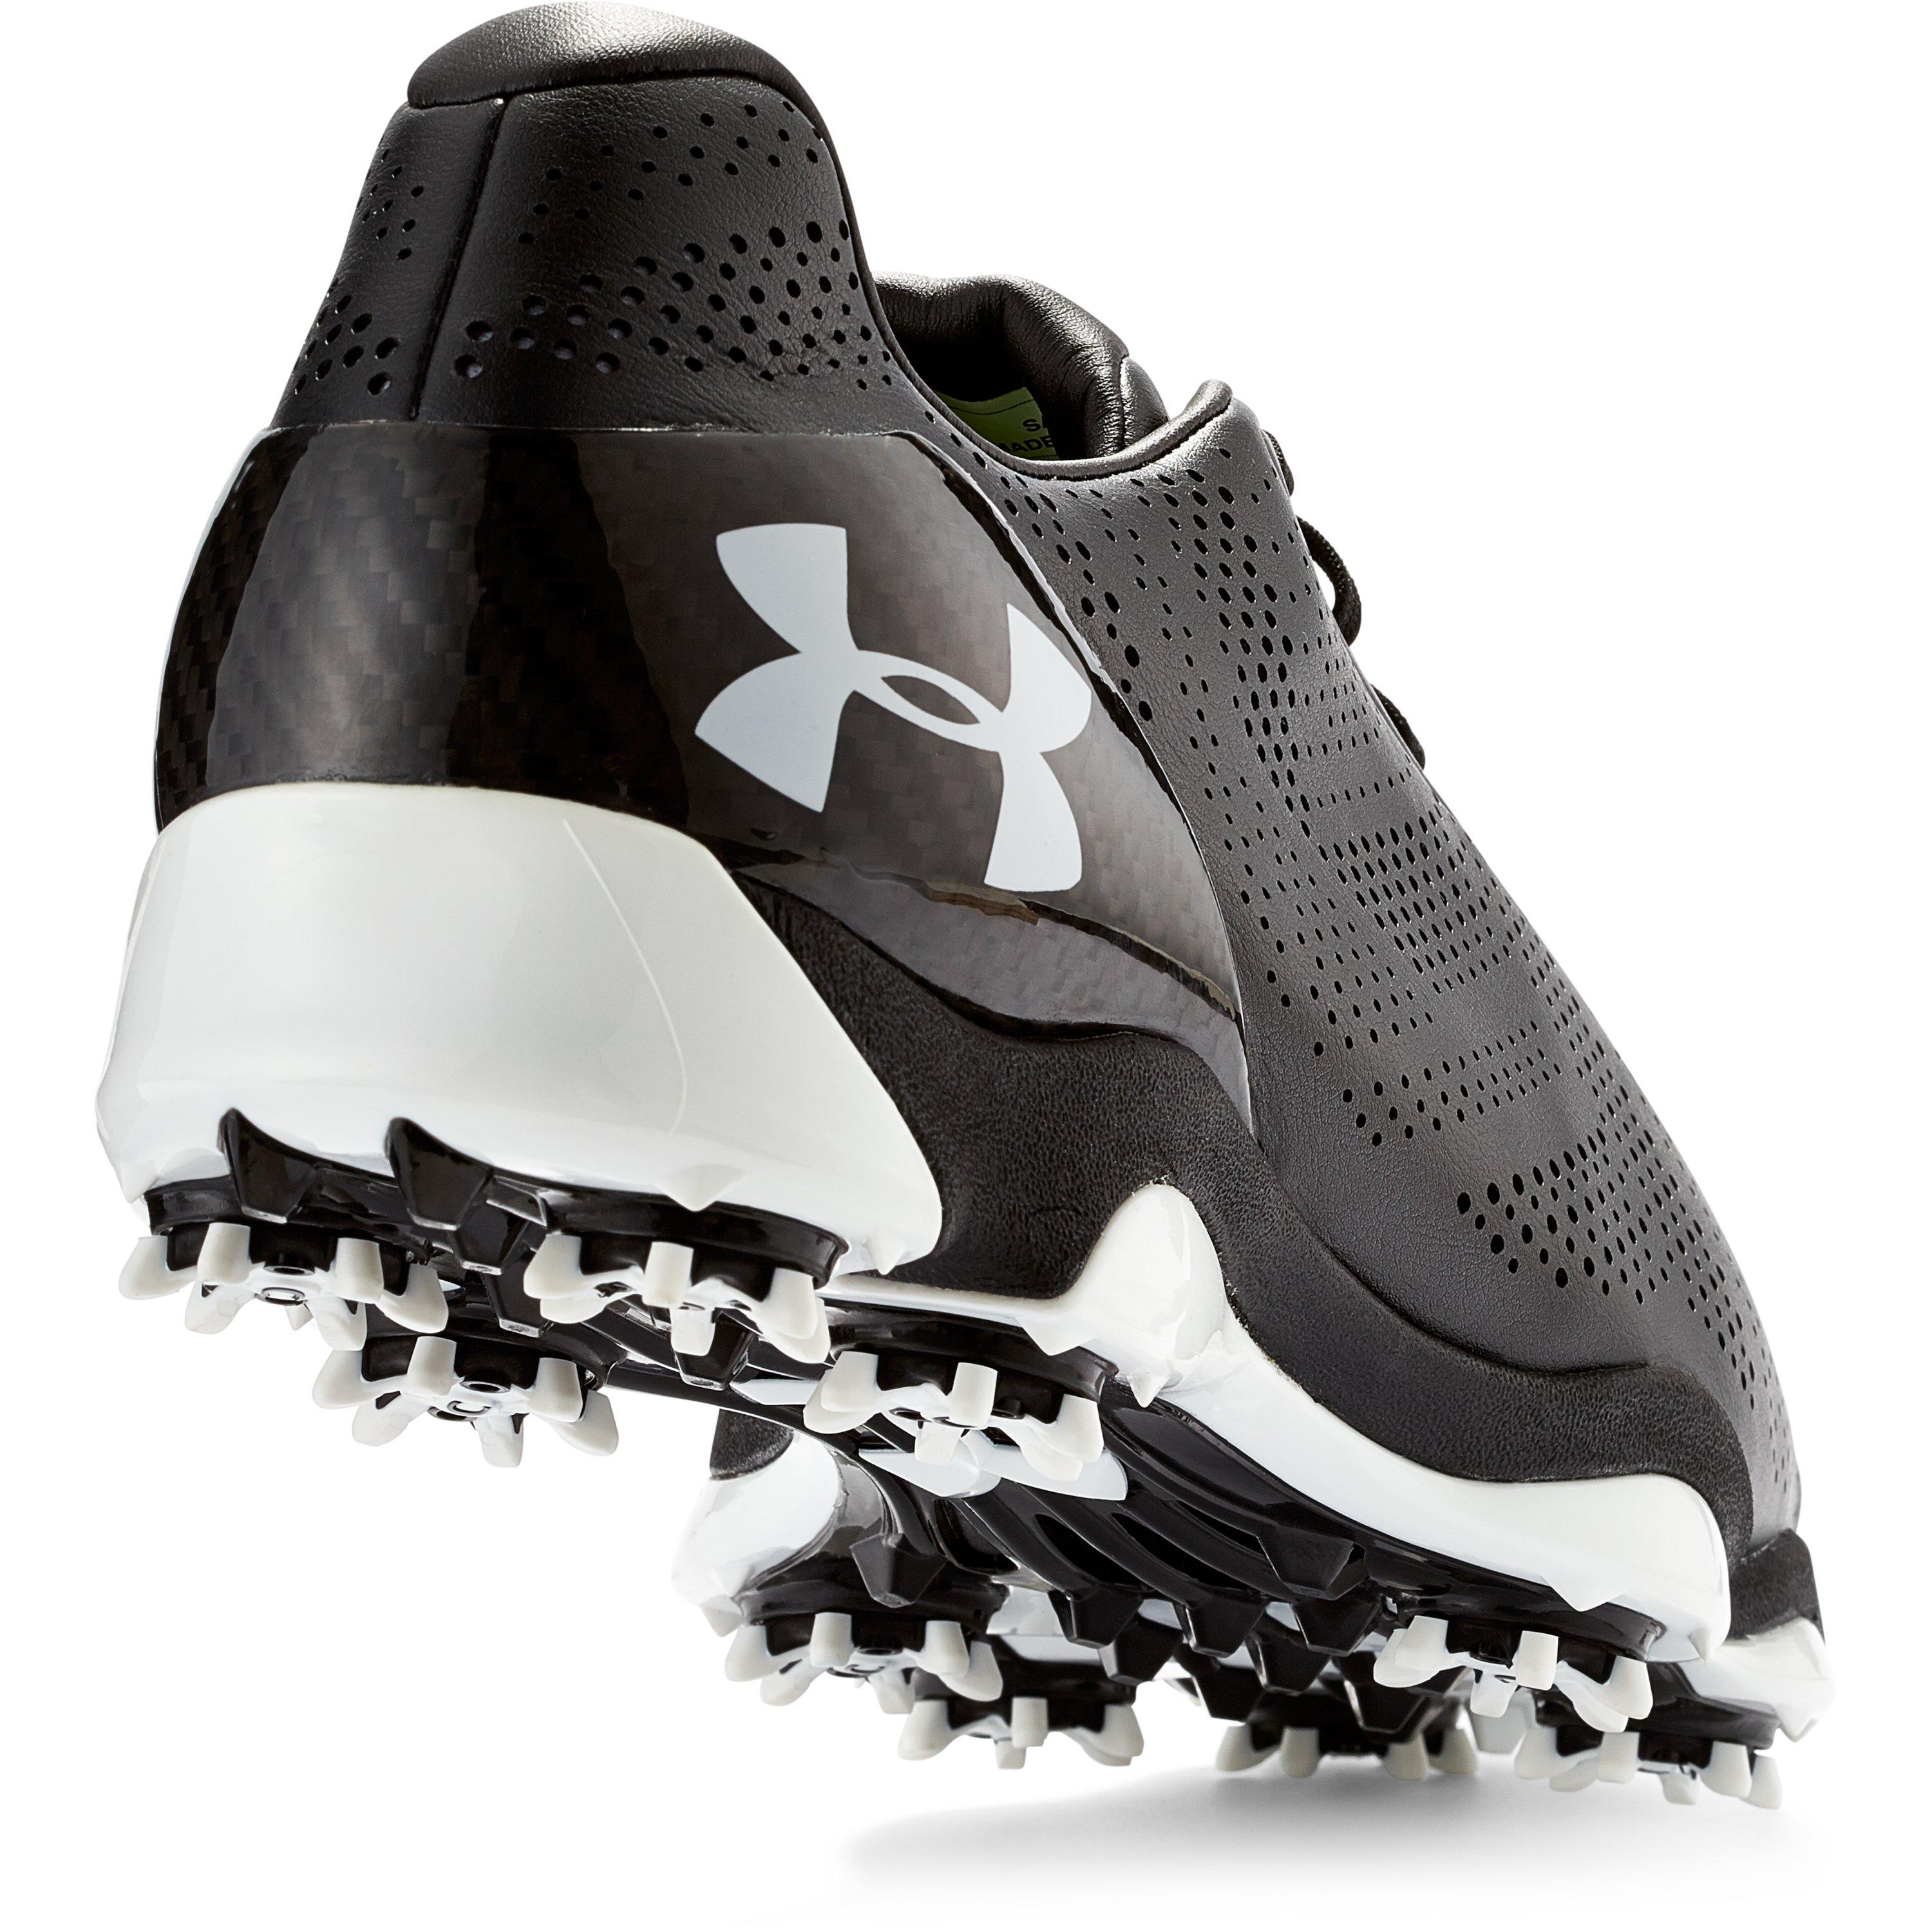 Under Armour Men's Ua Drive One Golf Shoes for Men - Lyst